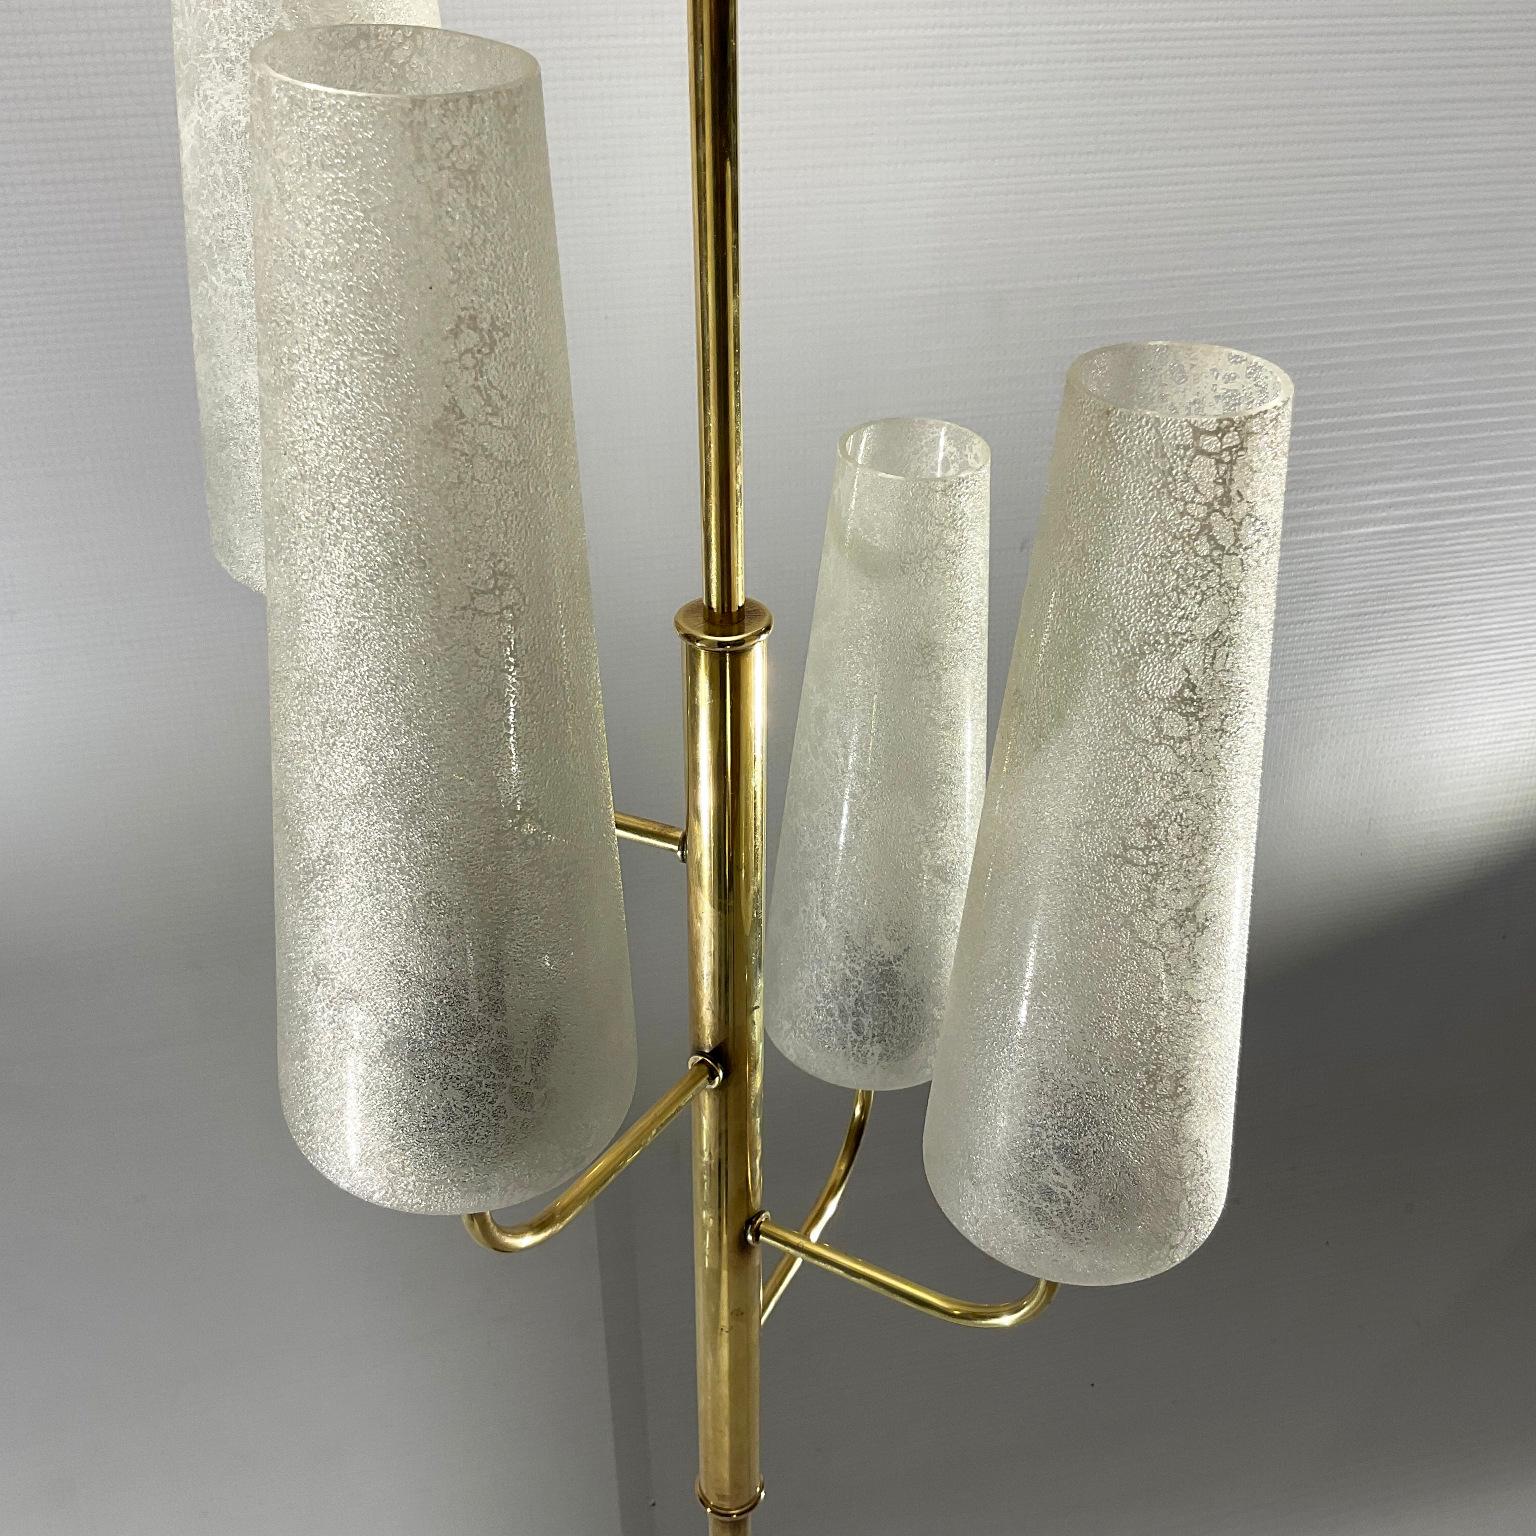 1950s French Brass Floor Lamp with Four Glass Frosted Shades In Good Condition For Sale In London, GB